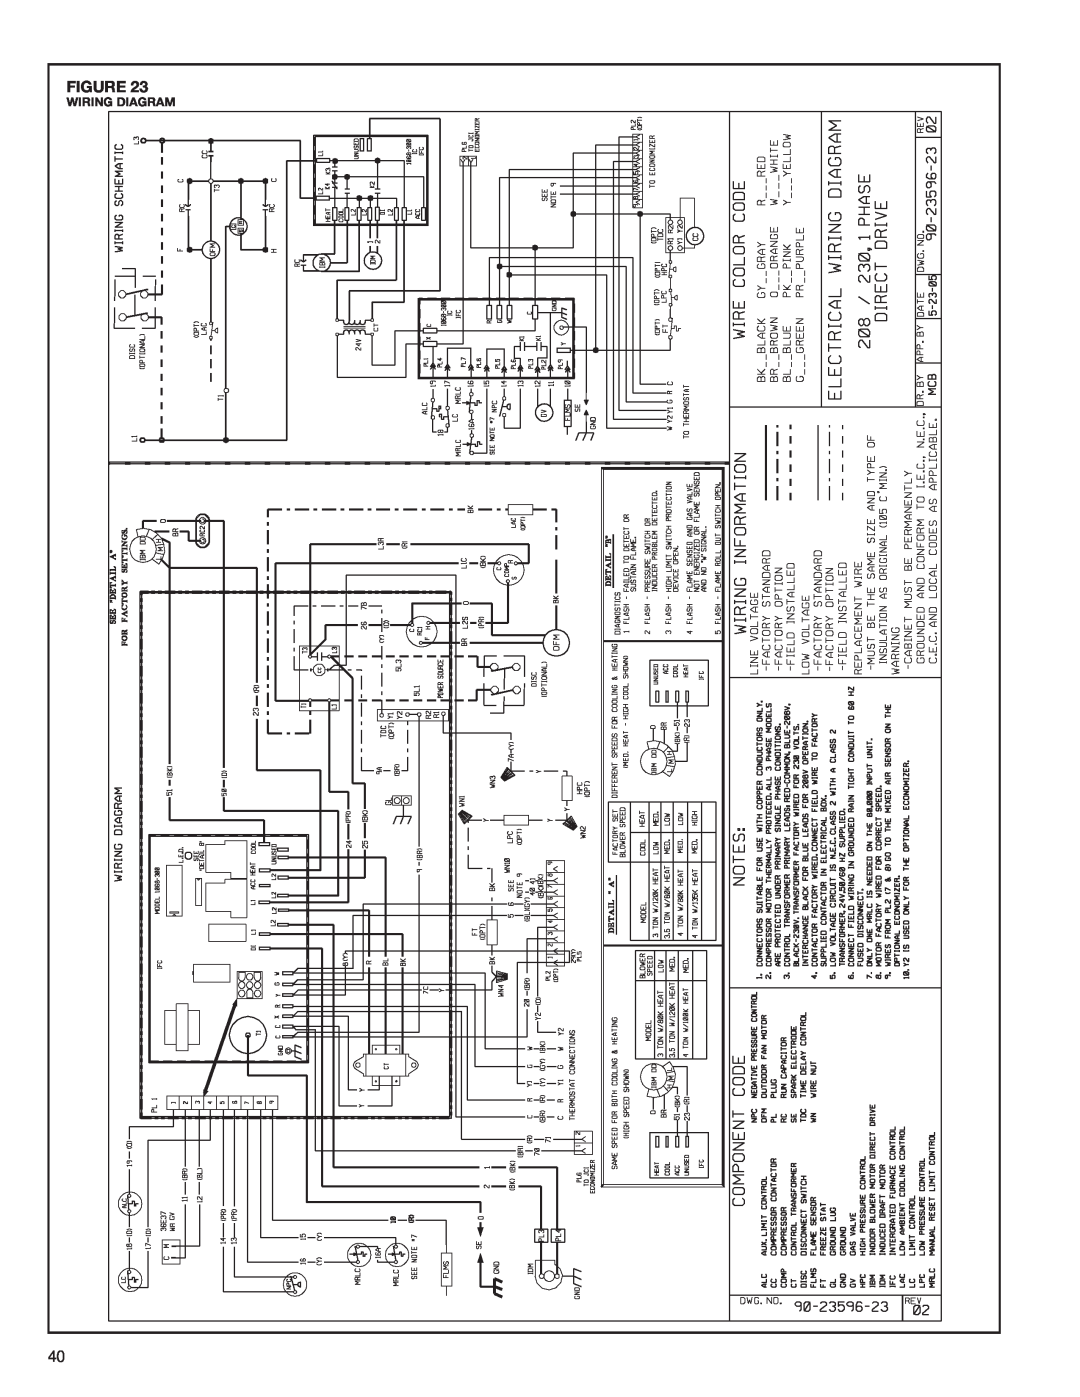 Heat Controller A-13 installation instructions Wiring Diagram 